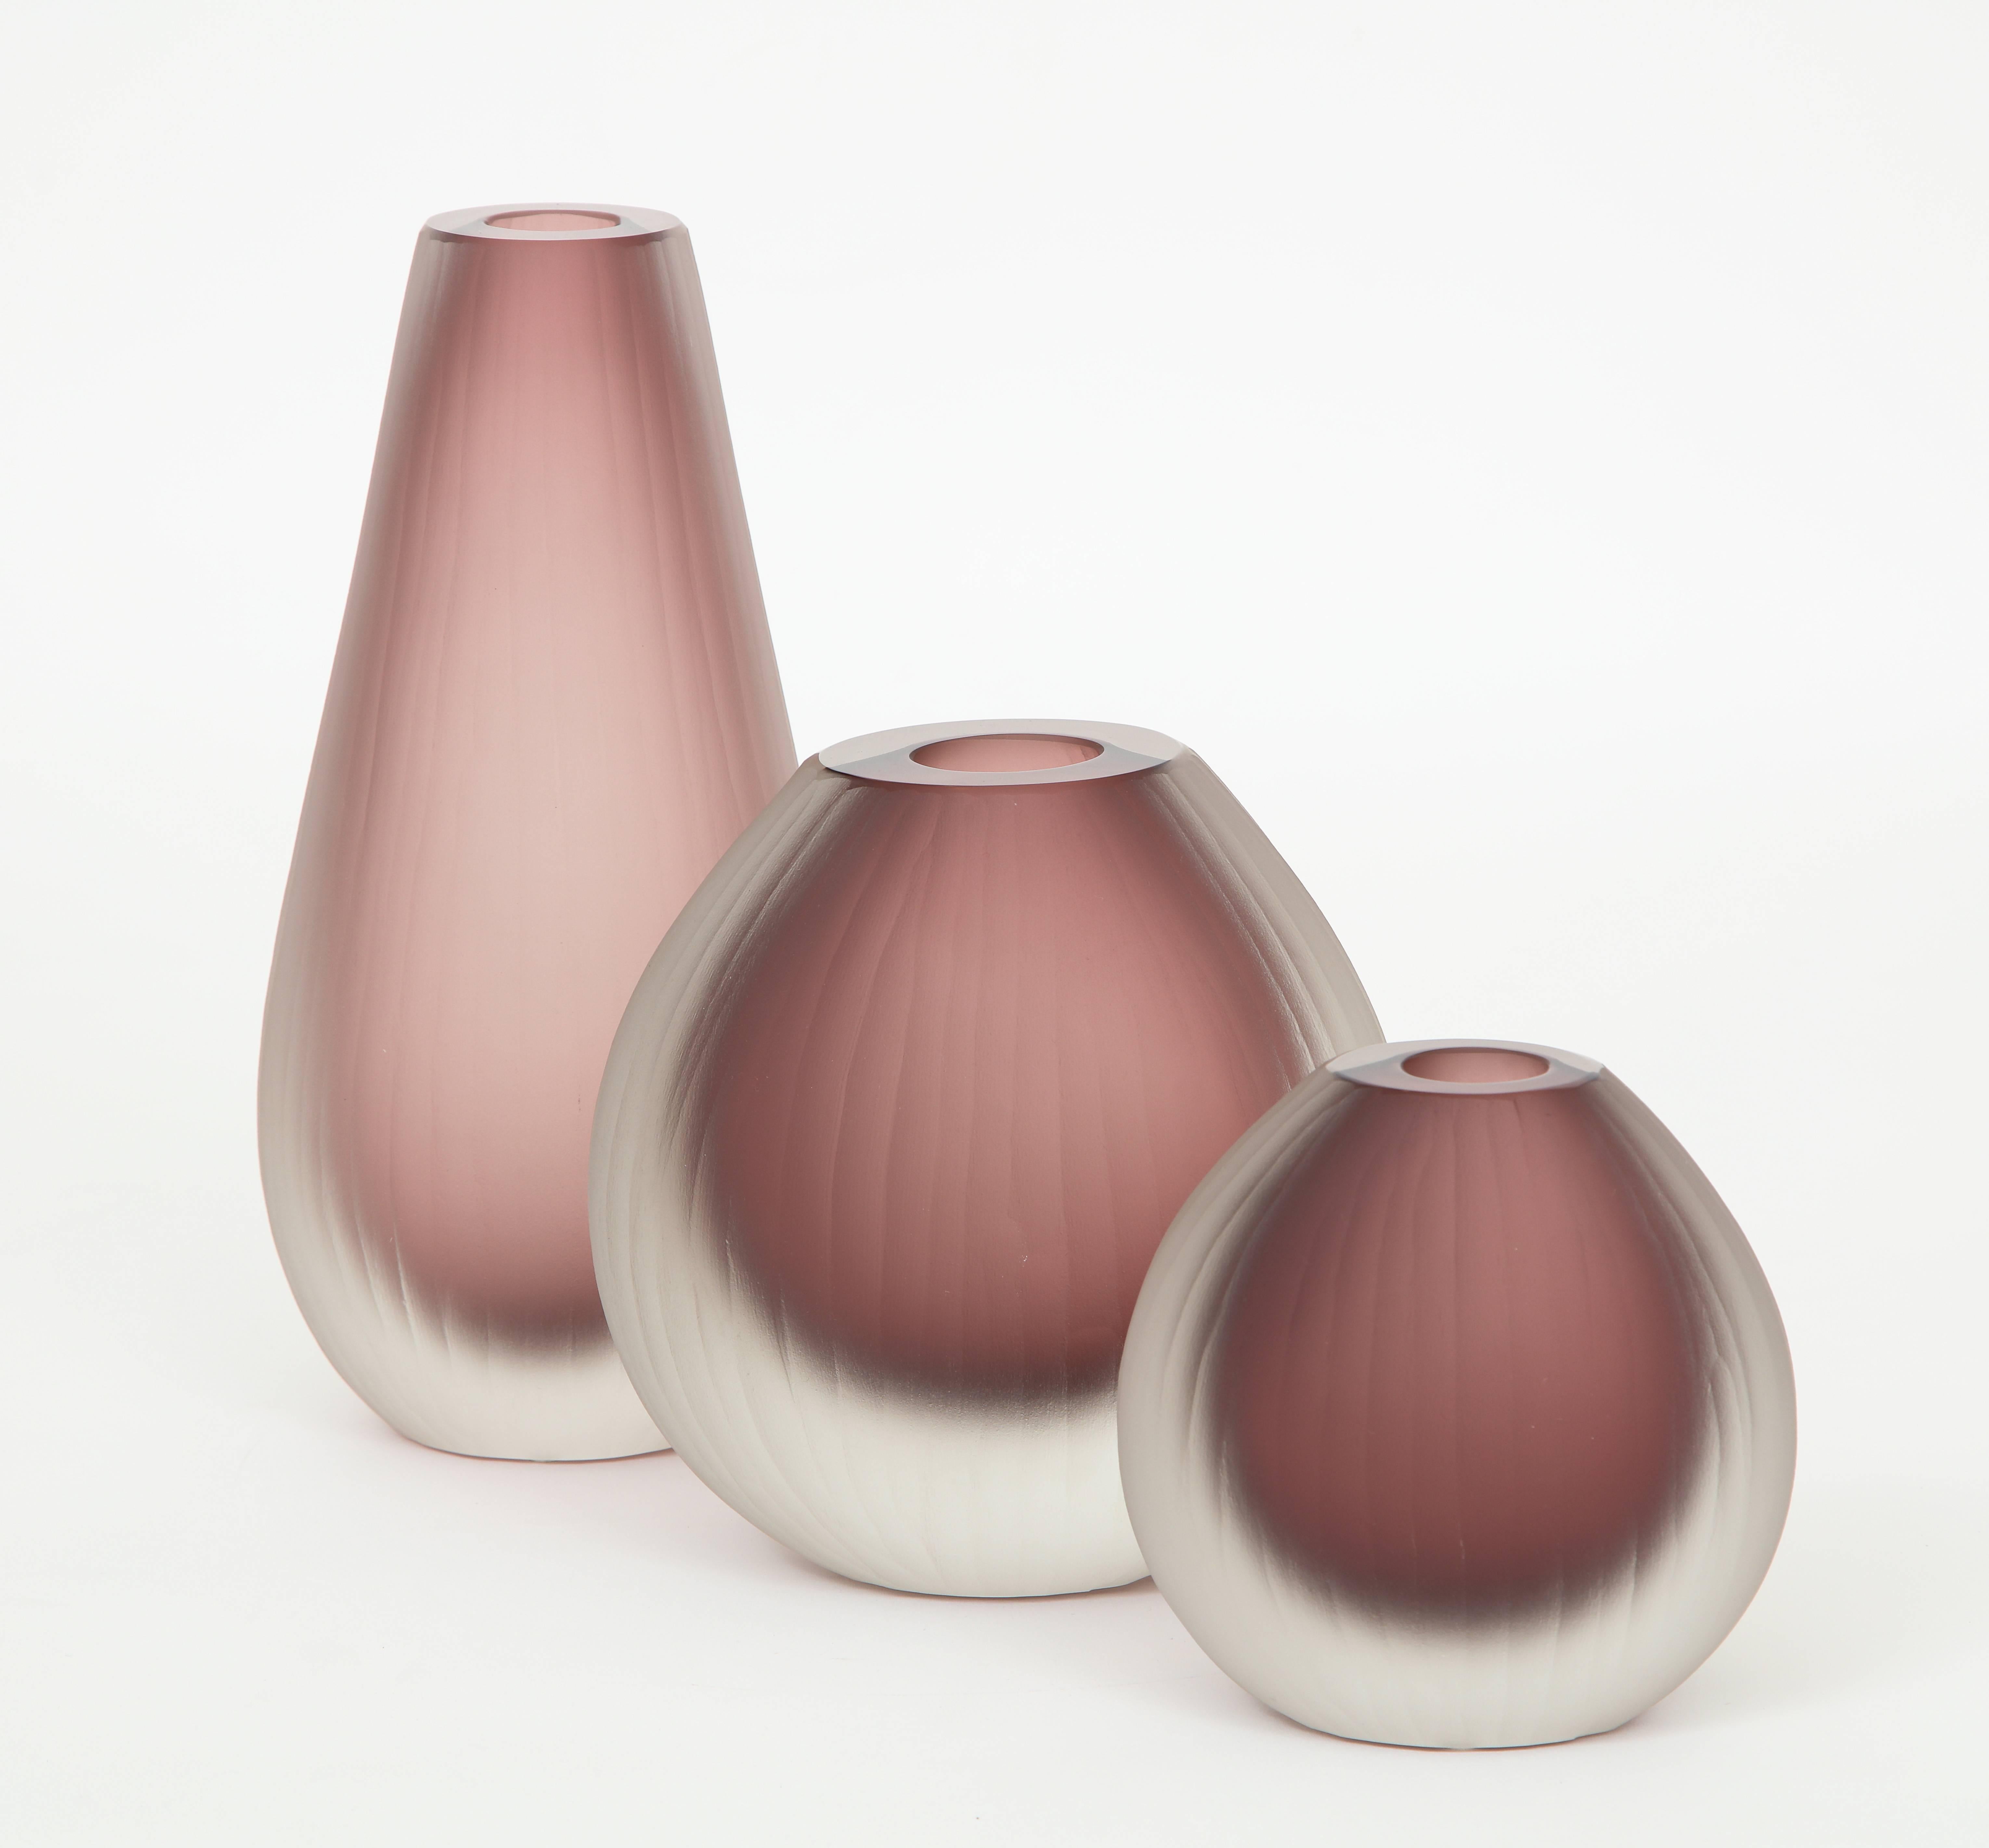 Set of three handblown oval Murano glass vases. Glass is softly ridged and frosted to give it that "iced" look. The color is absolutely stunning in Amethyst / Rose depending on how you look at them. Signed by the Murano glass master